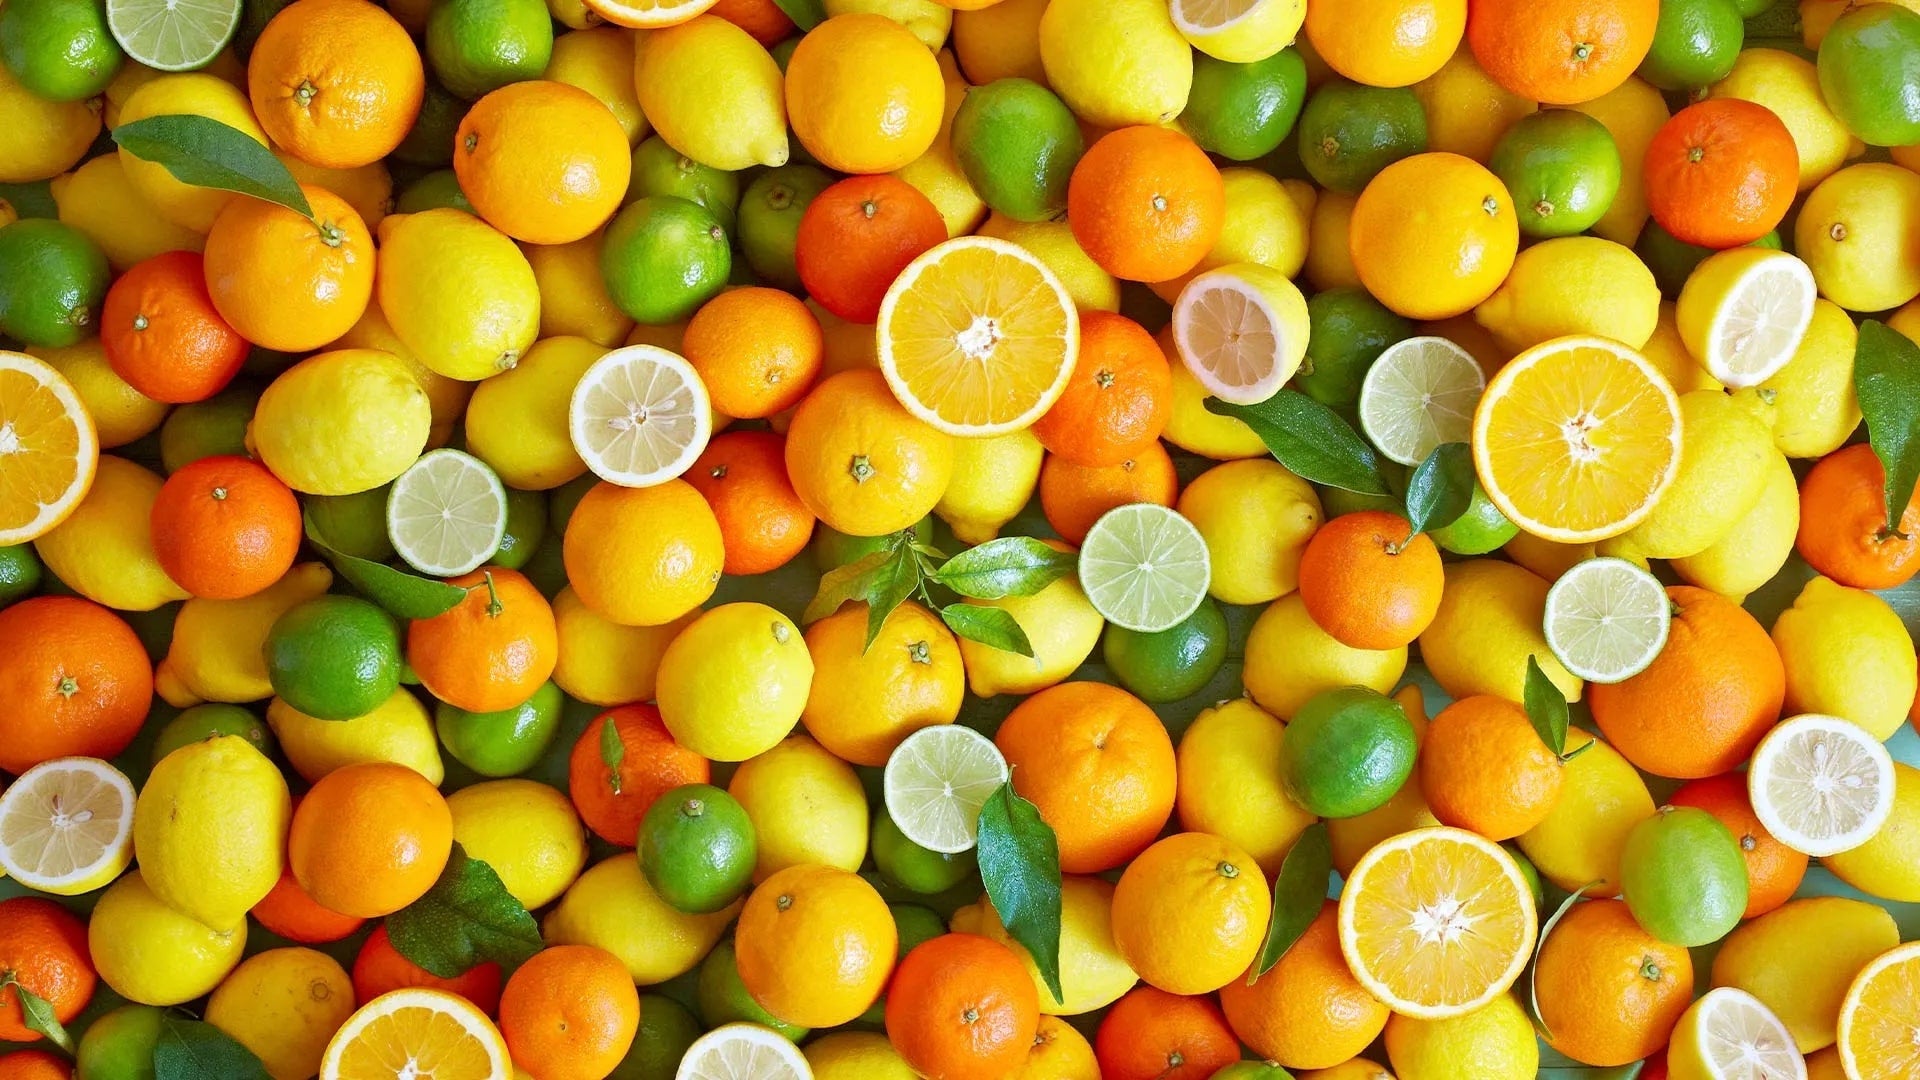 A colorful assortment of citrus fruits including oranges, lemons, limes, and tangerines, showcasing their rich Vitamin C content.